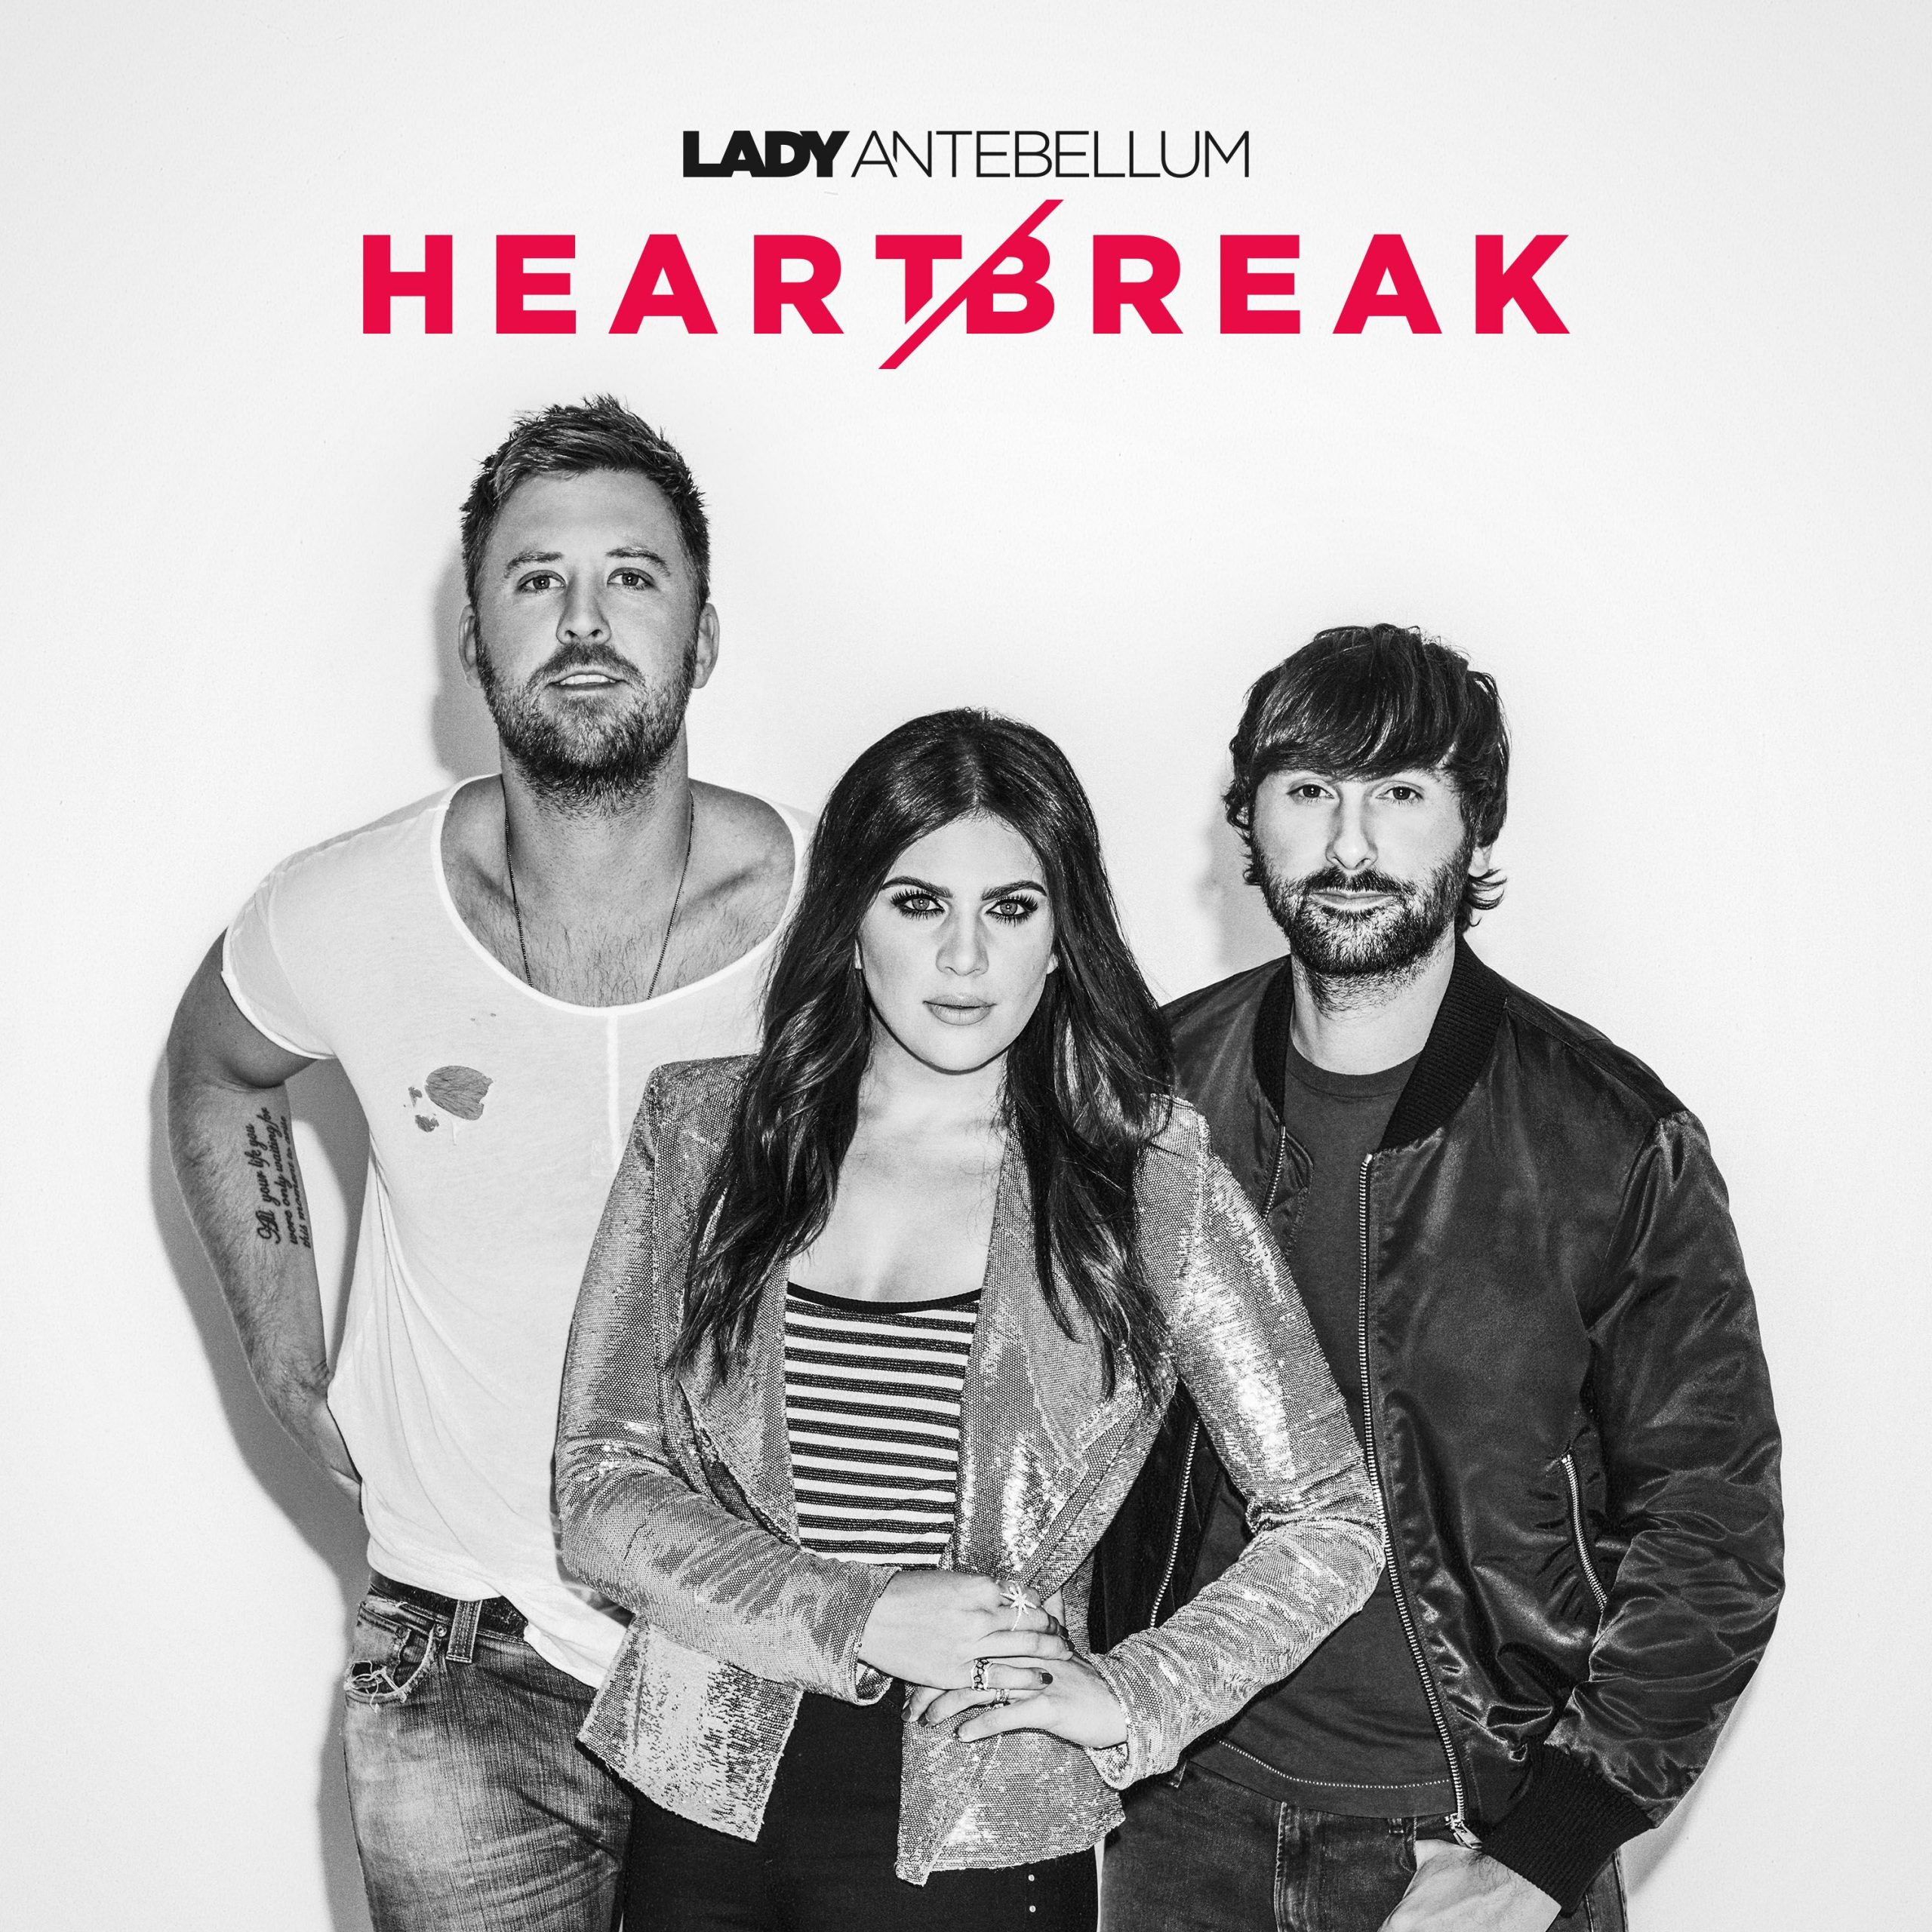 LADY ANTEBELLUM’S HEART BREAK PULLS THE TOP SPOT ON THE BILLBOARD COUNTRY ALBUMS CHART, MARKING FIFTH NO. ONE DEBUT